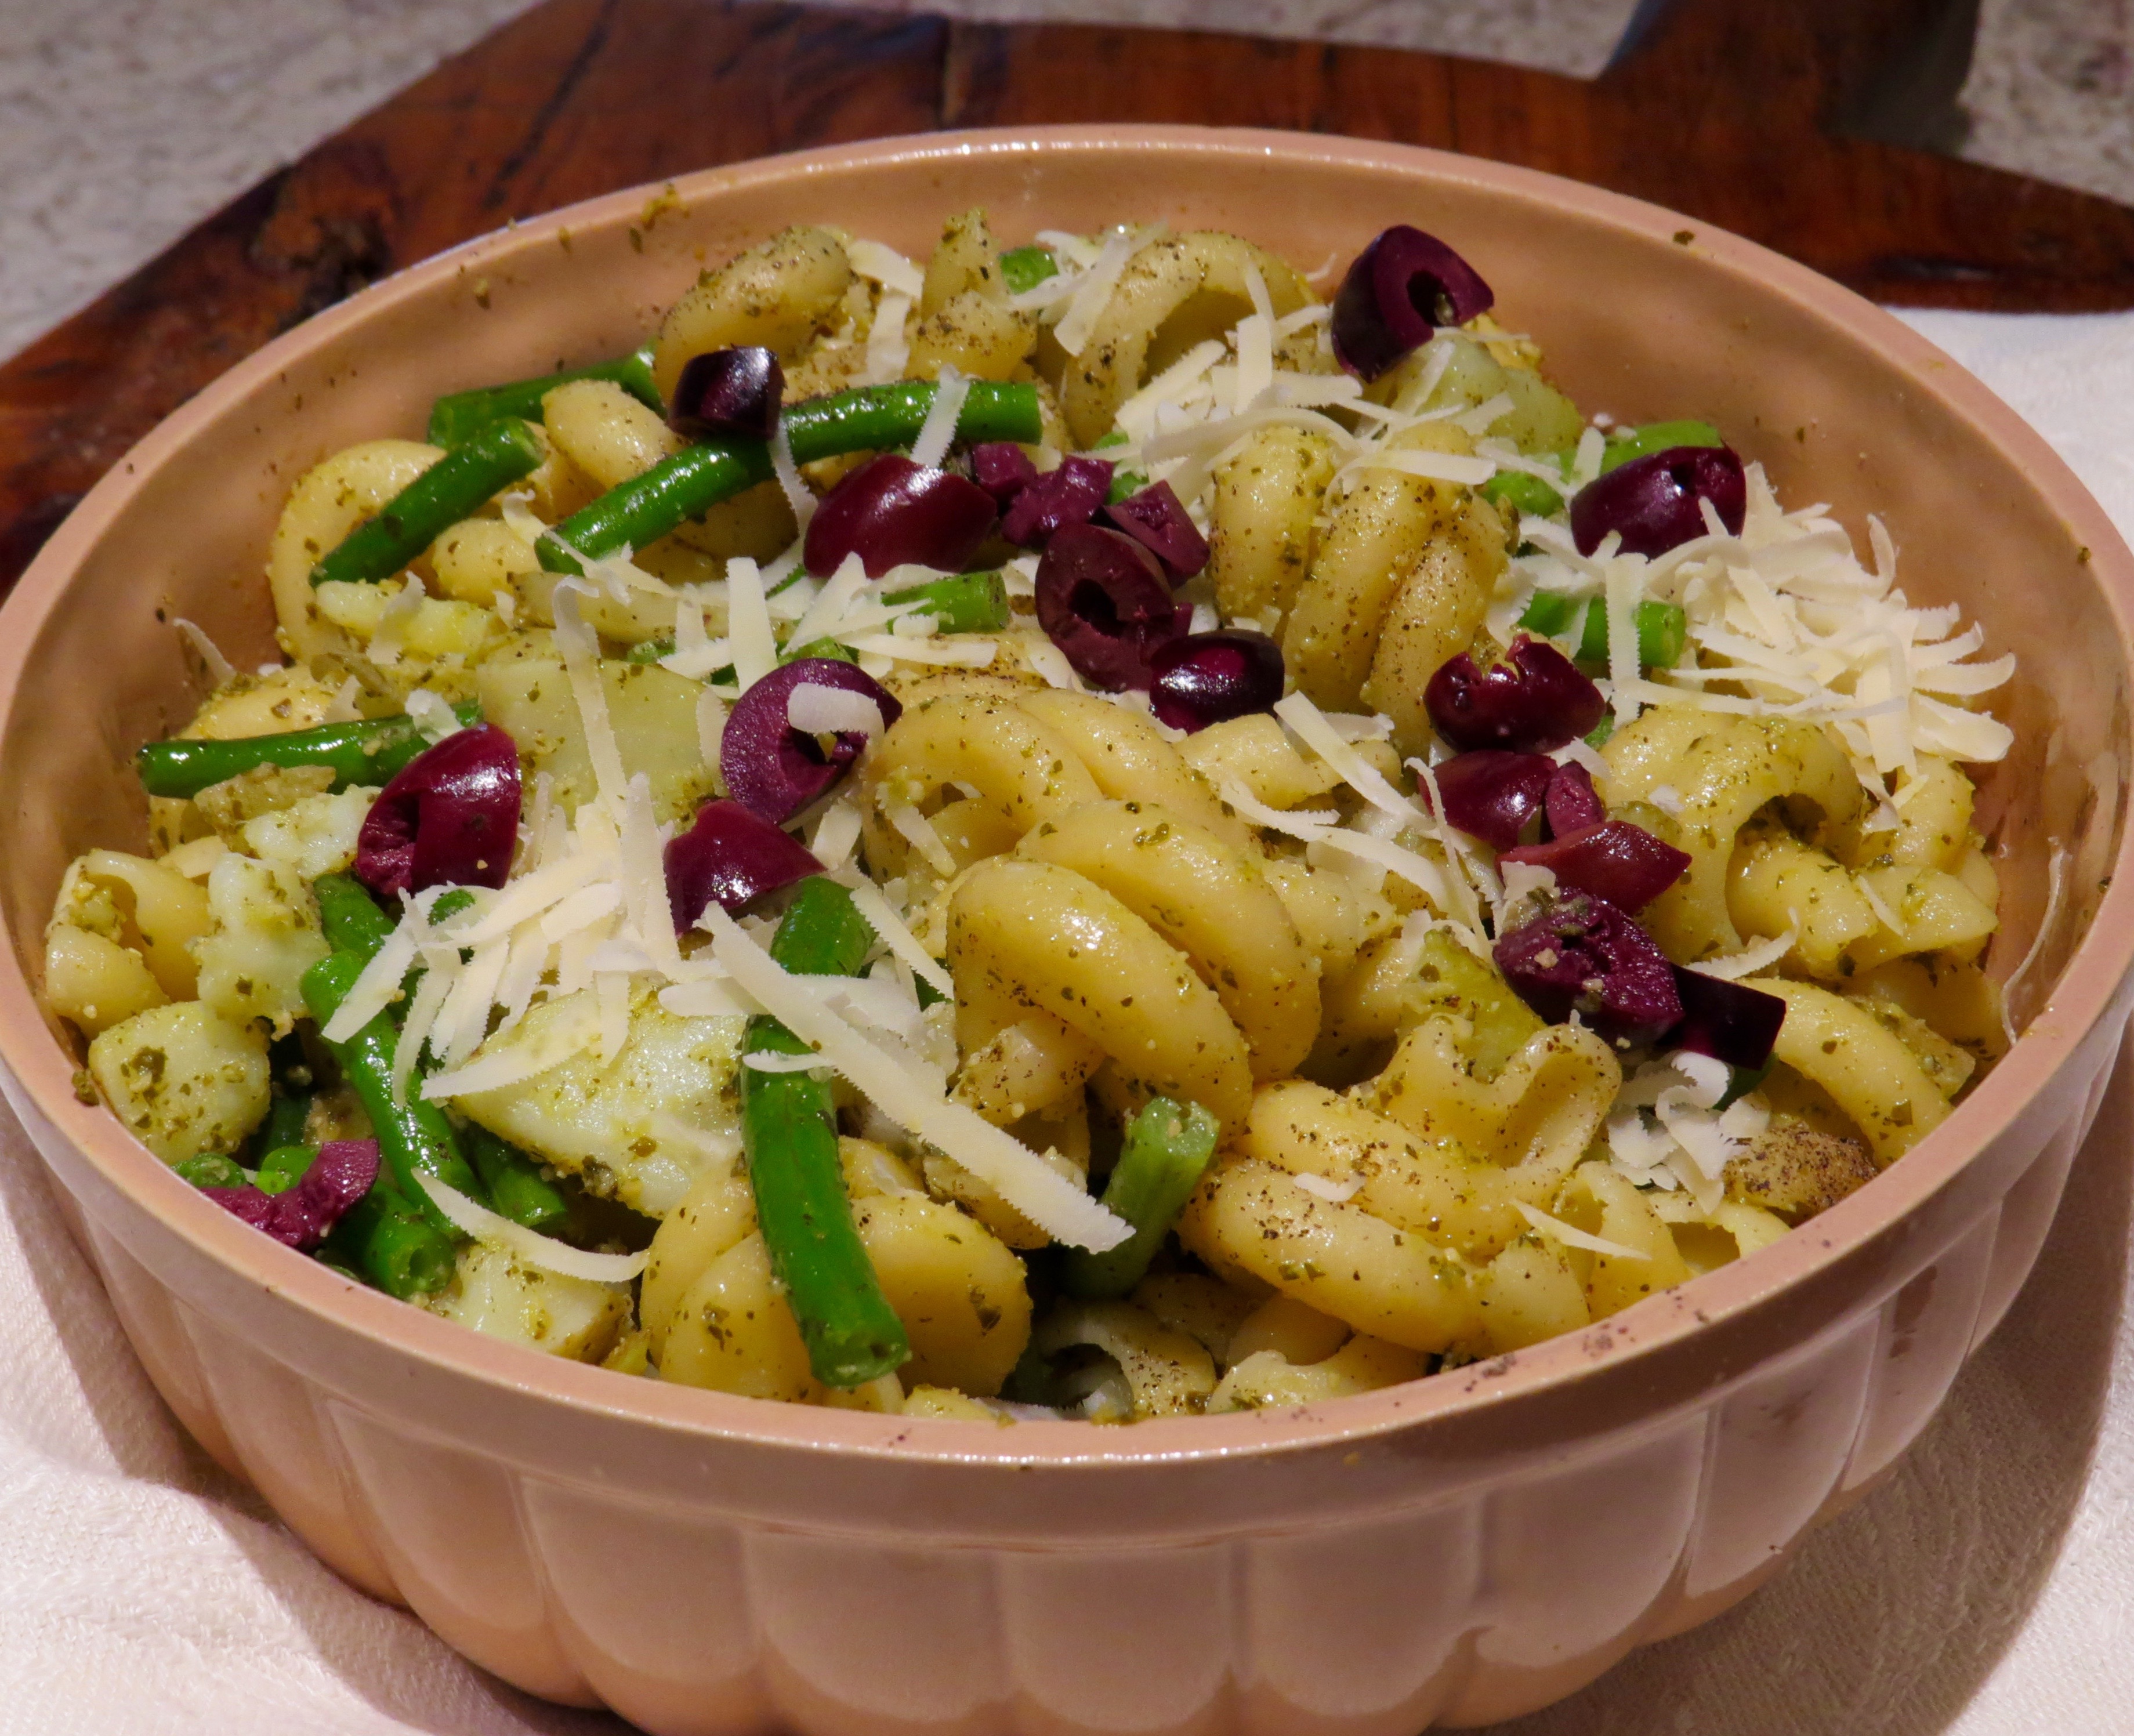 Pasta with new potatoes, green beans, and pesto, served steaming hot or room temperature.